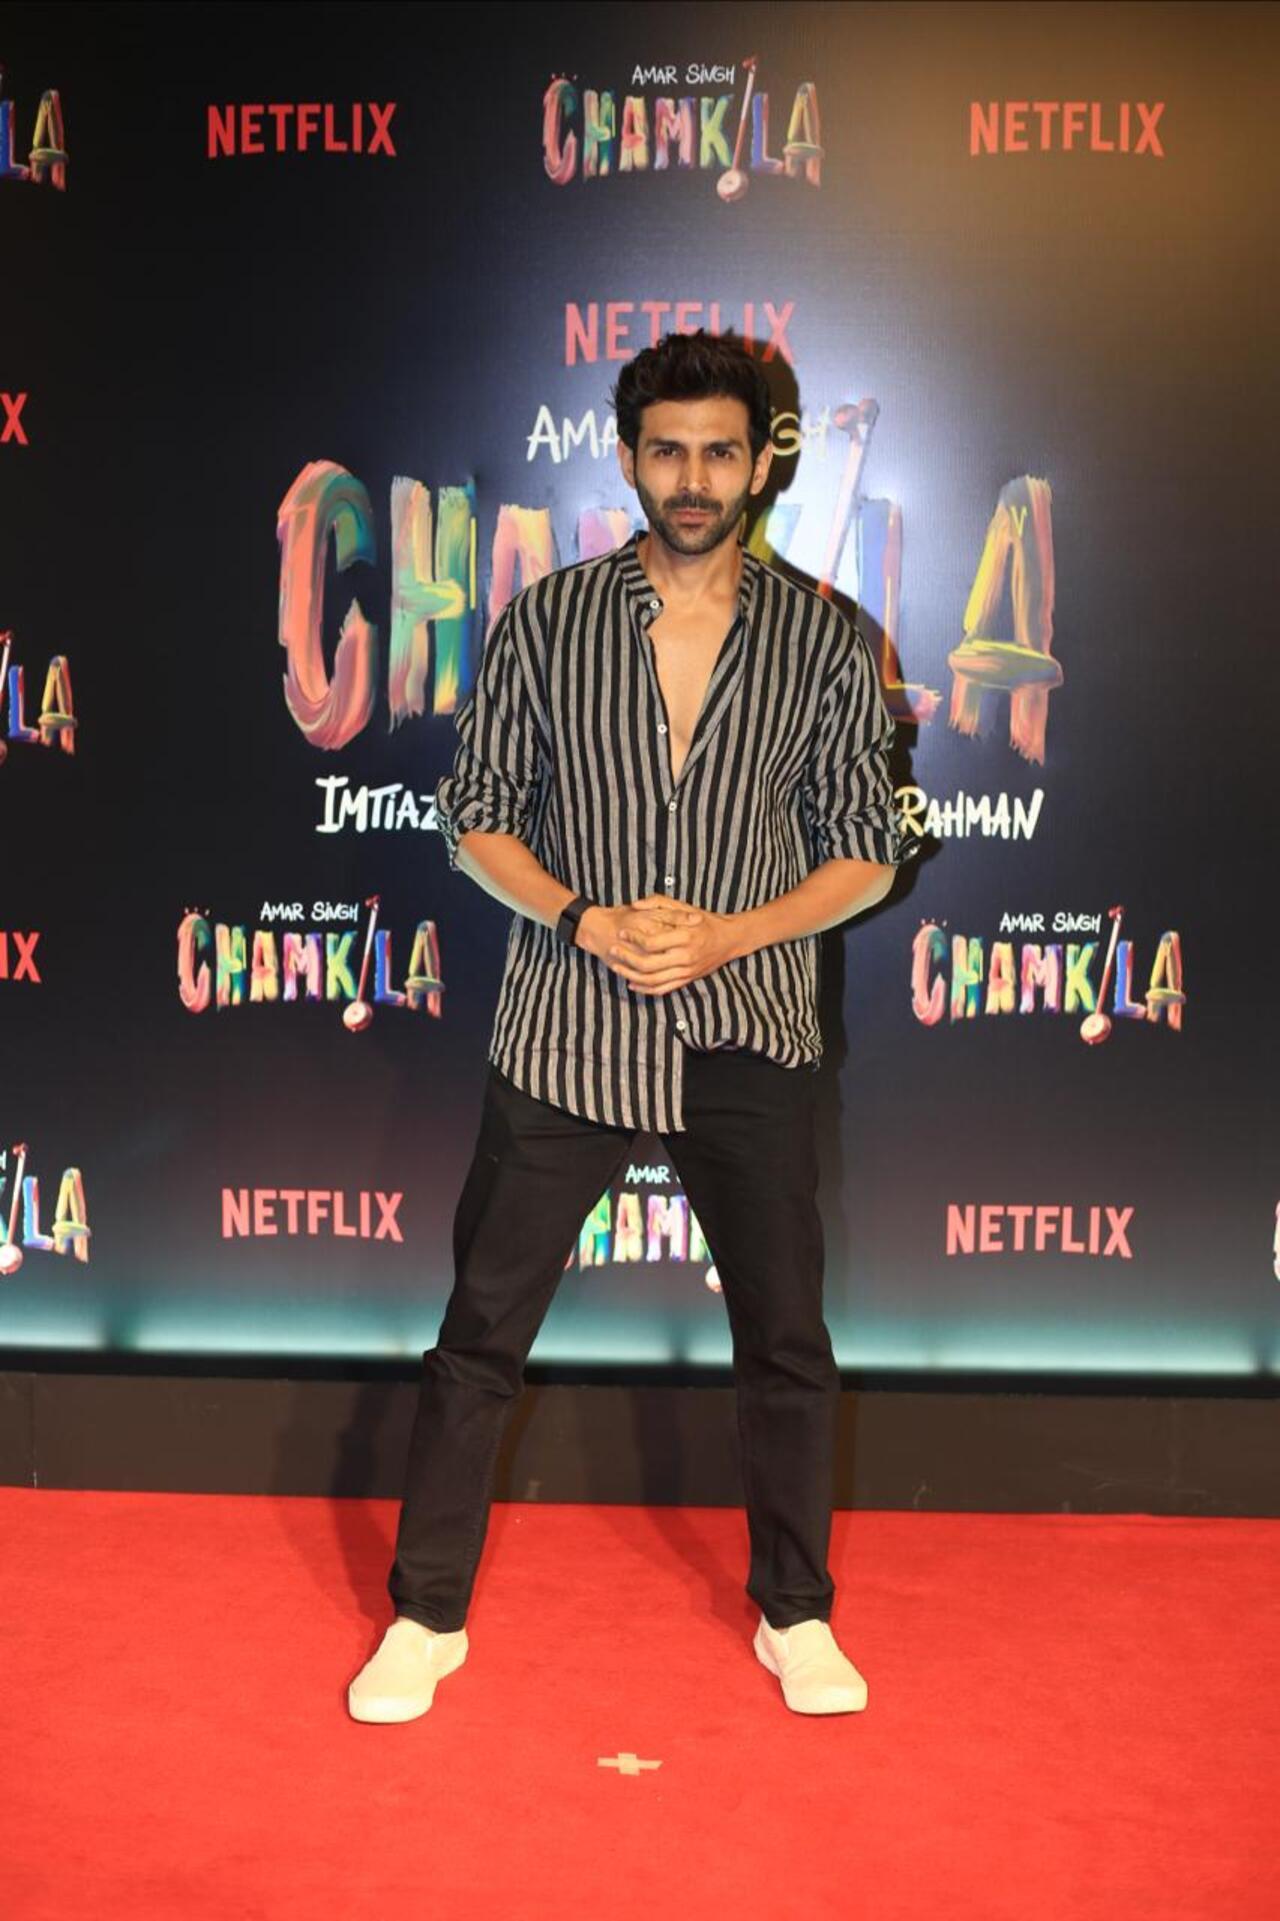 Kartik Aaryan was also spotted at the screening. The actor has previously worked with Imtiaz in the film 'Love Aaj Kal'